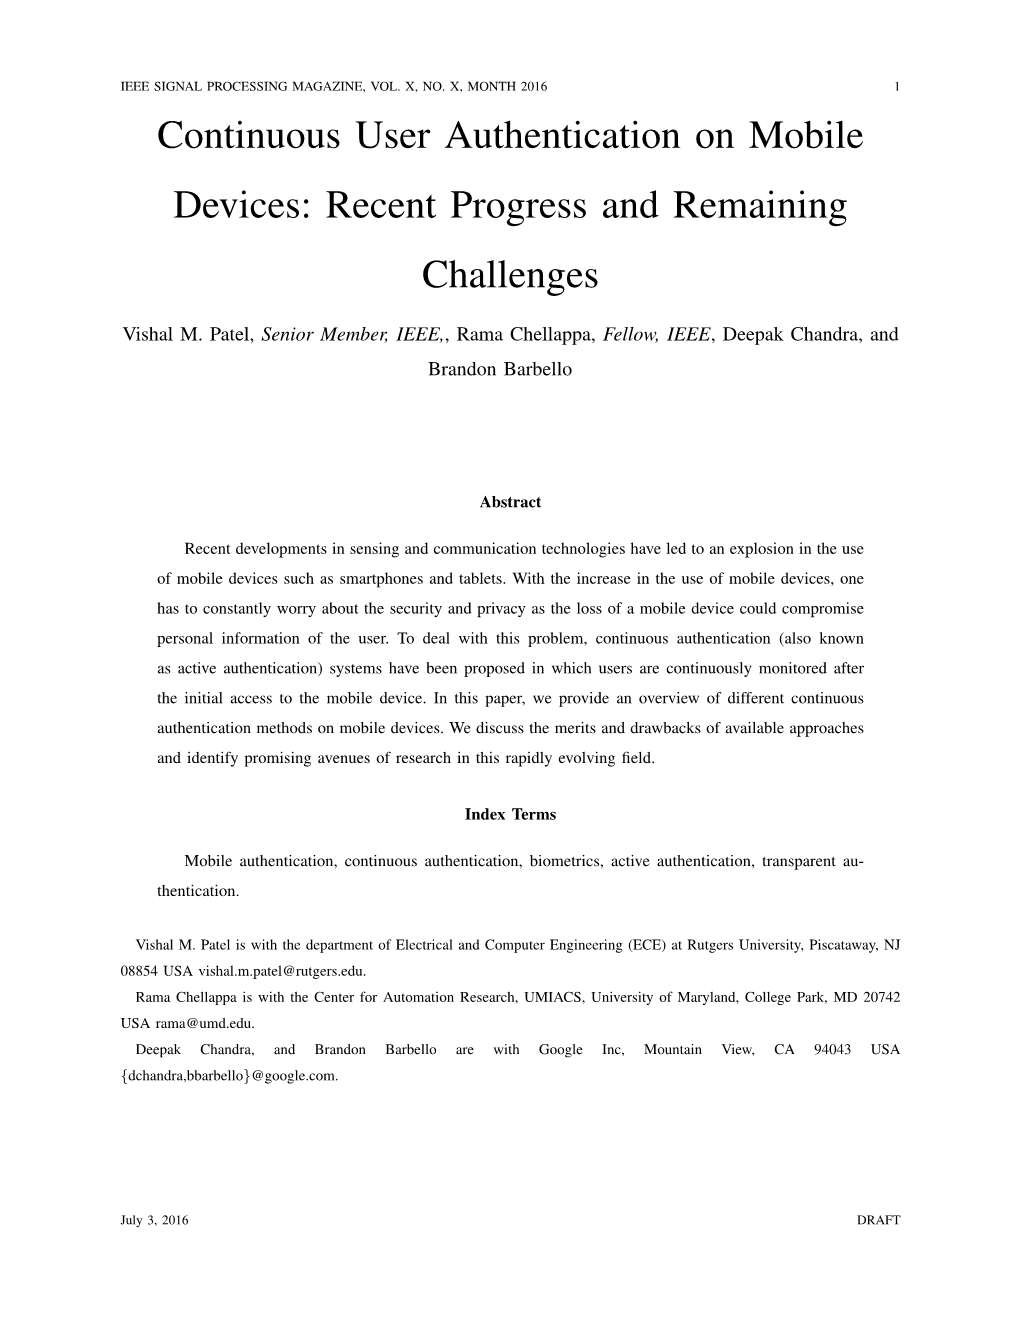 Continuous User Authentication on Mobile Devices: Recent Progress and Remaining Challenges